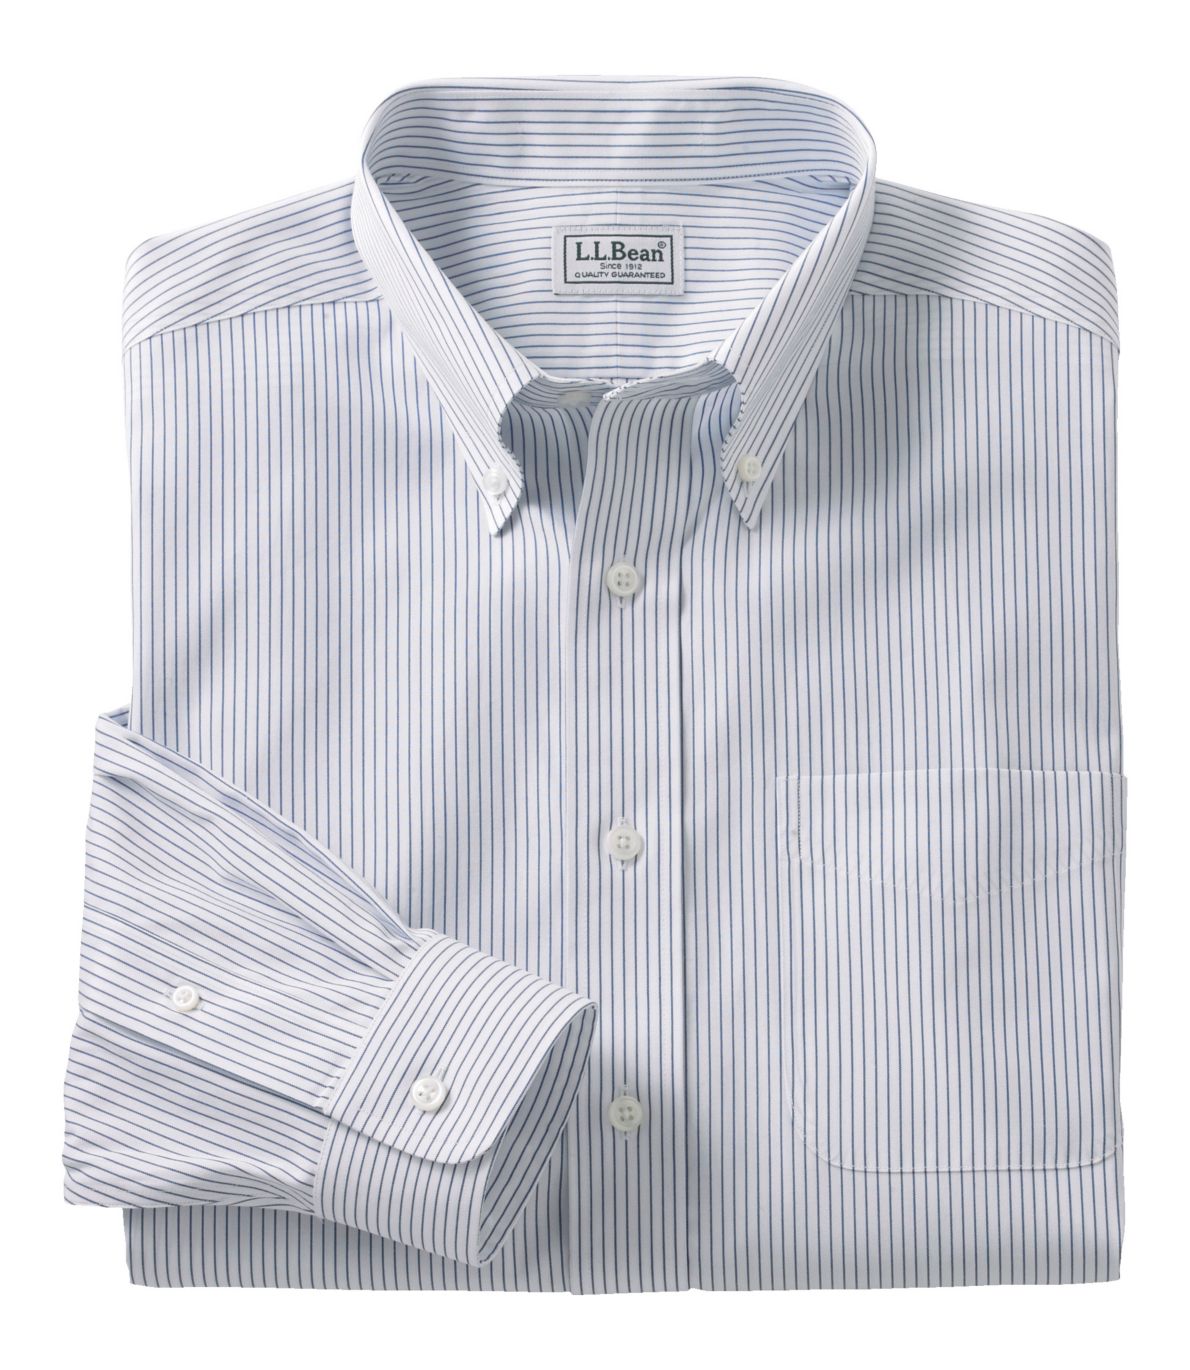 Men's Wrinkle-Free Pinpoint Oxford Cloth Shirt, Slightly Fitted Stripe